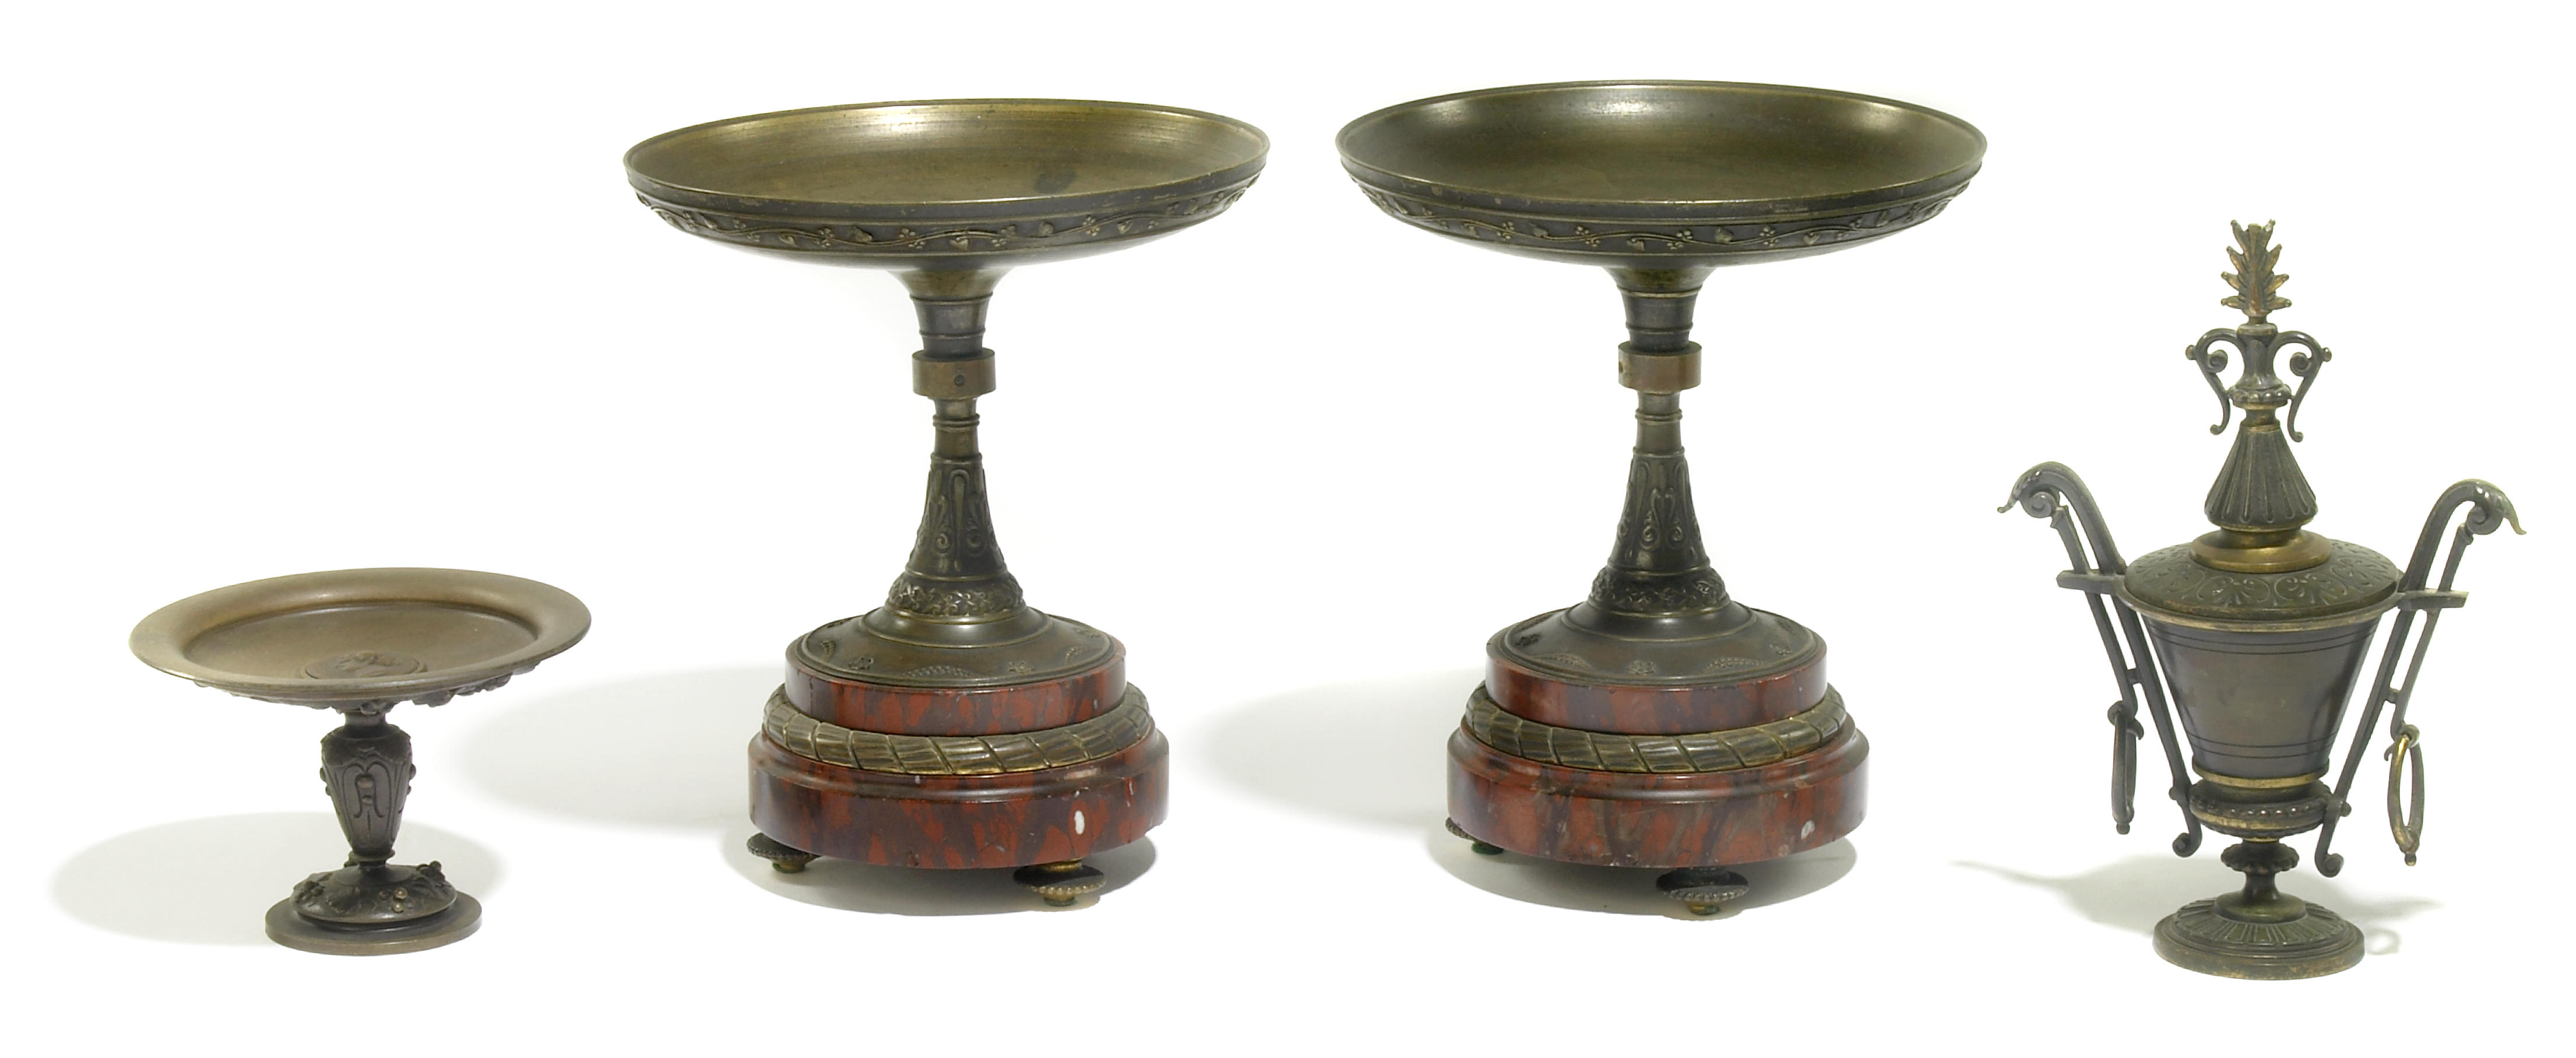 A pair of French patinated bronze